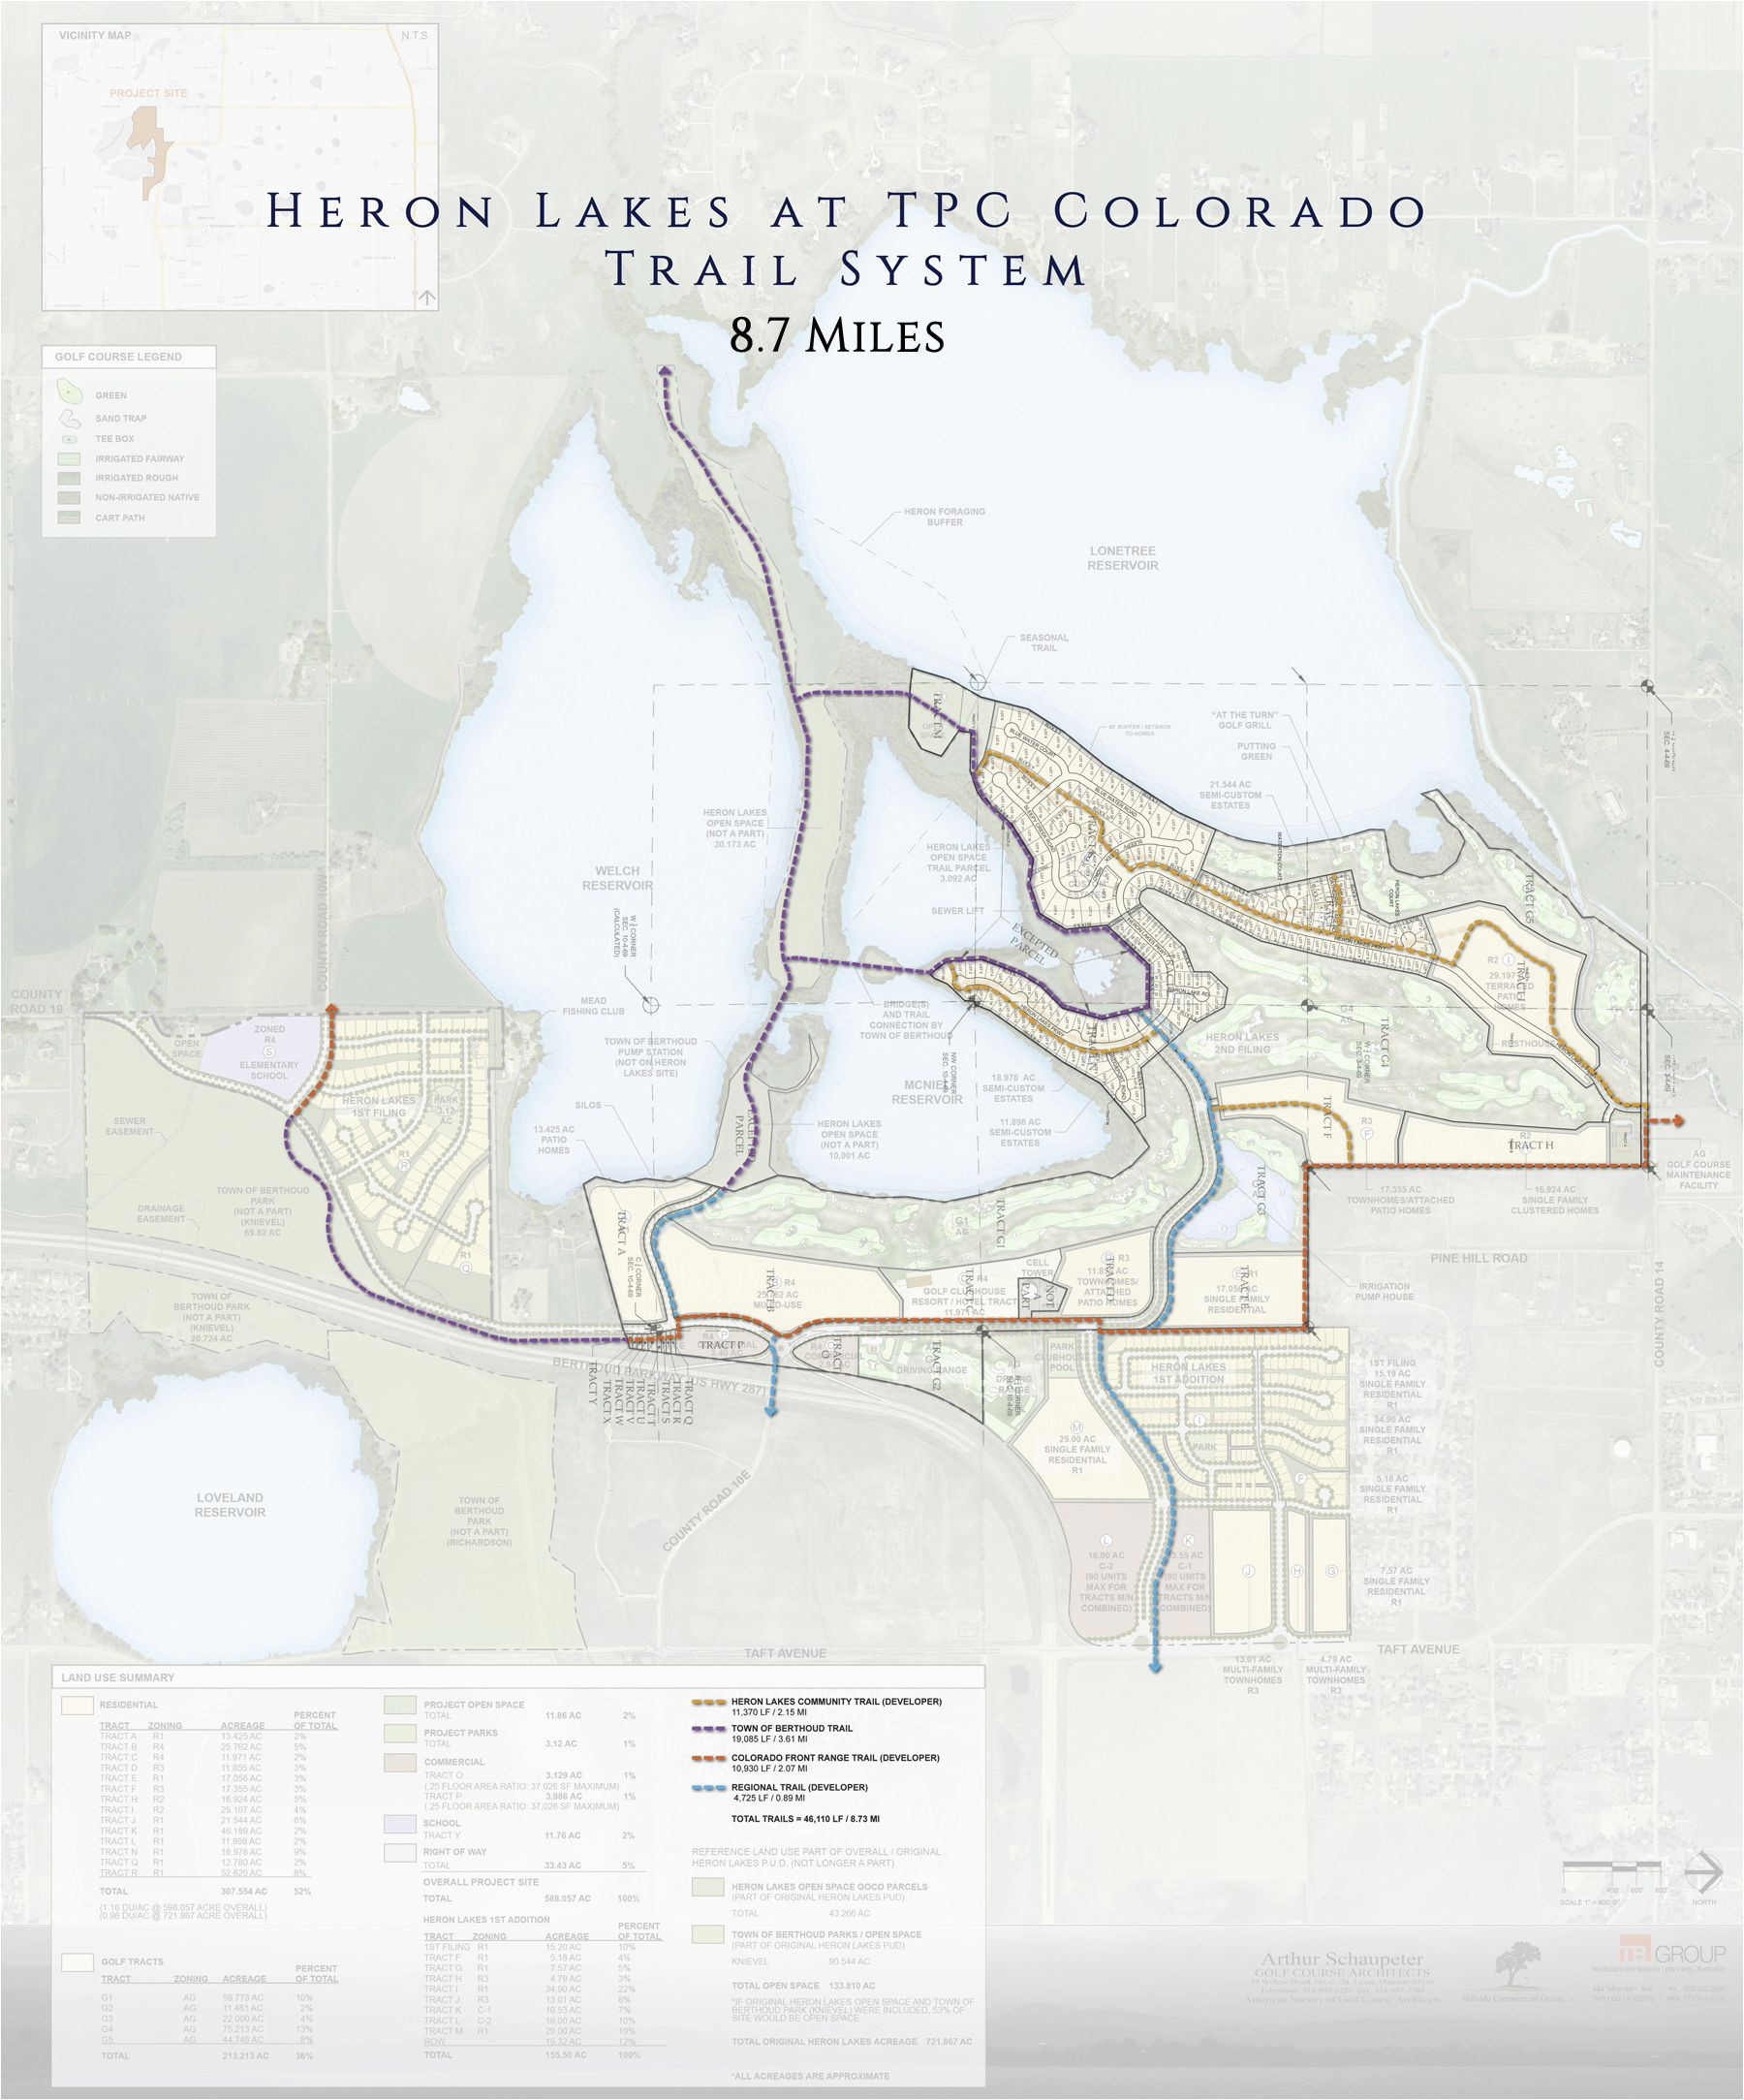 heron lakes golf community planned in berthoud co laura nelson